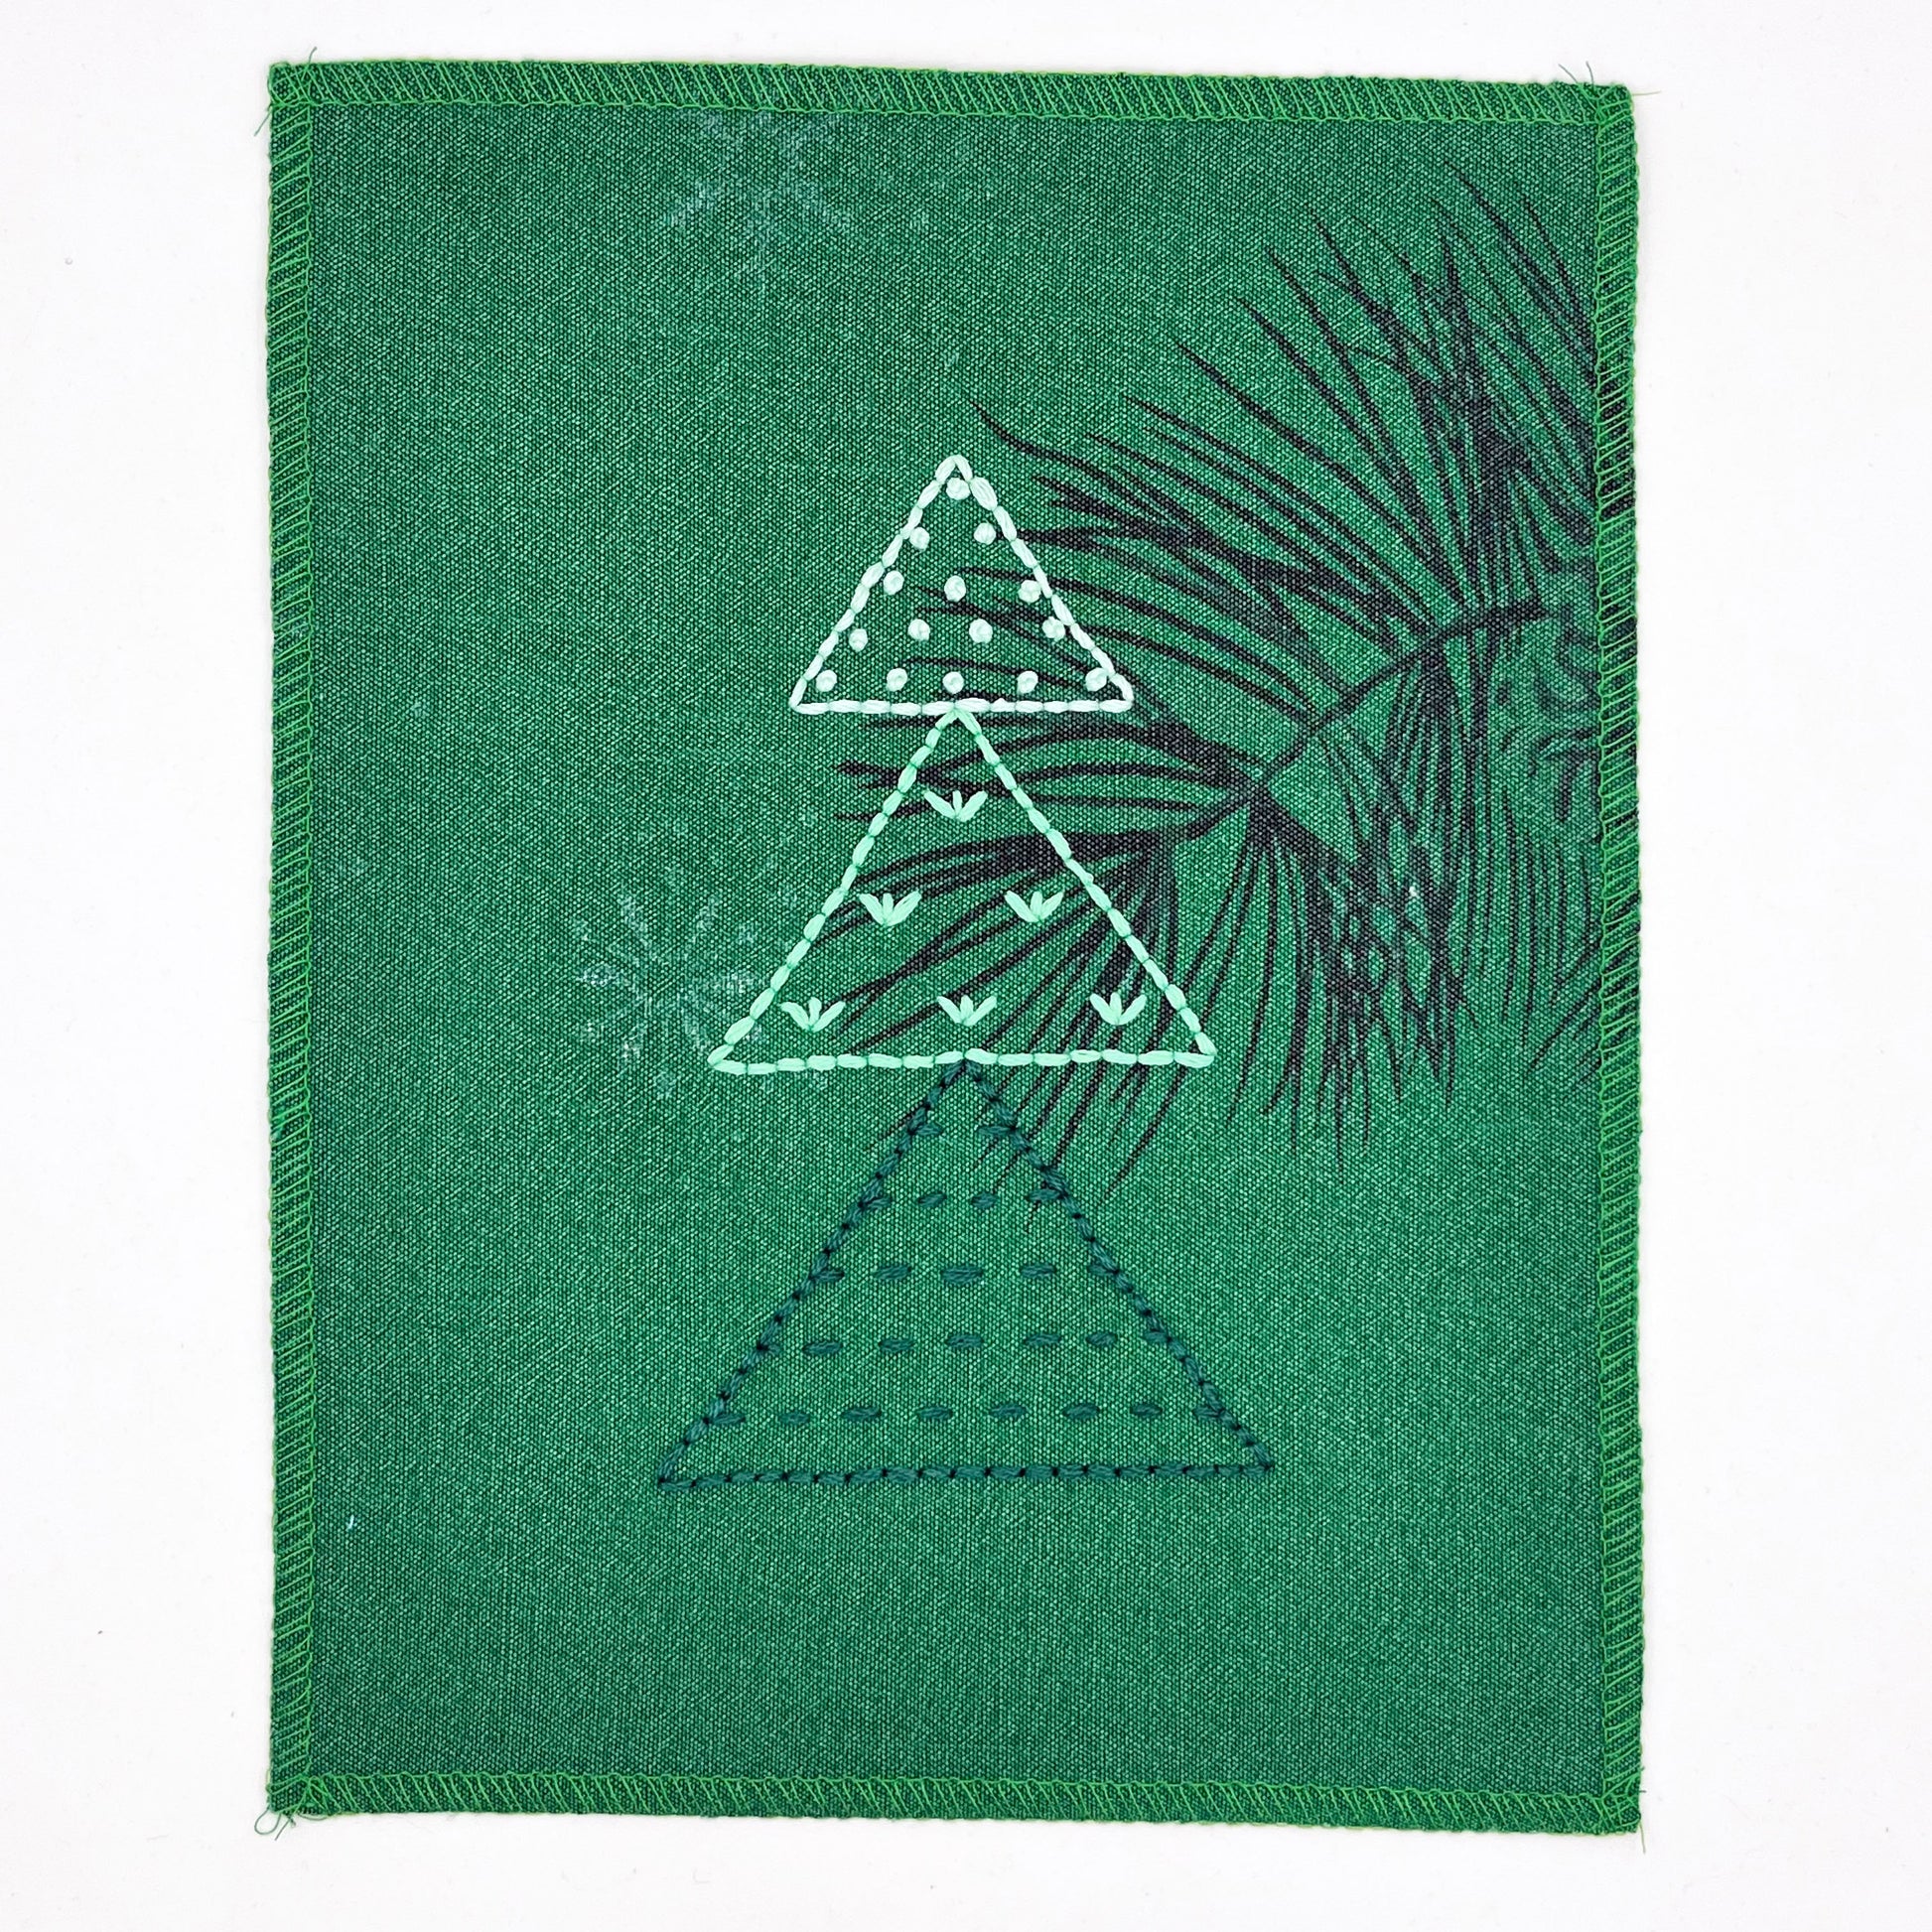 a fabric wall hanging made from bright green fabric with pine branches printed on it, and stitched over with Christmas trees made from three triangles, each triangle filled with different types of stitches in shades of green